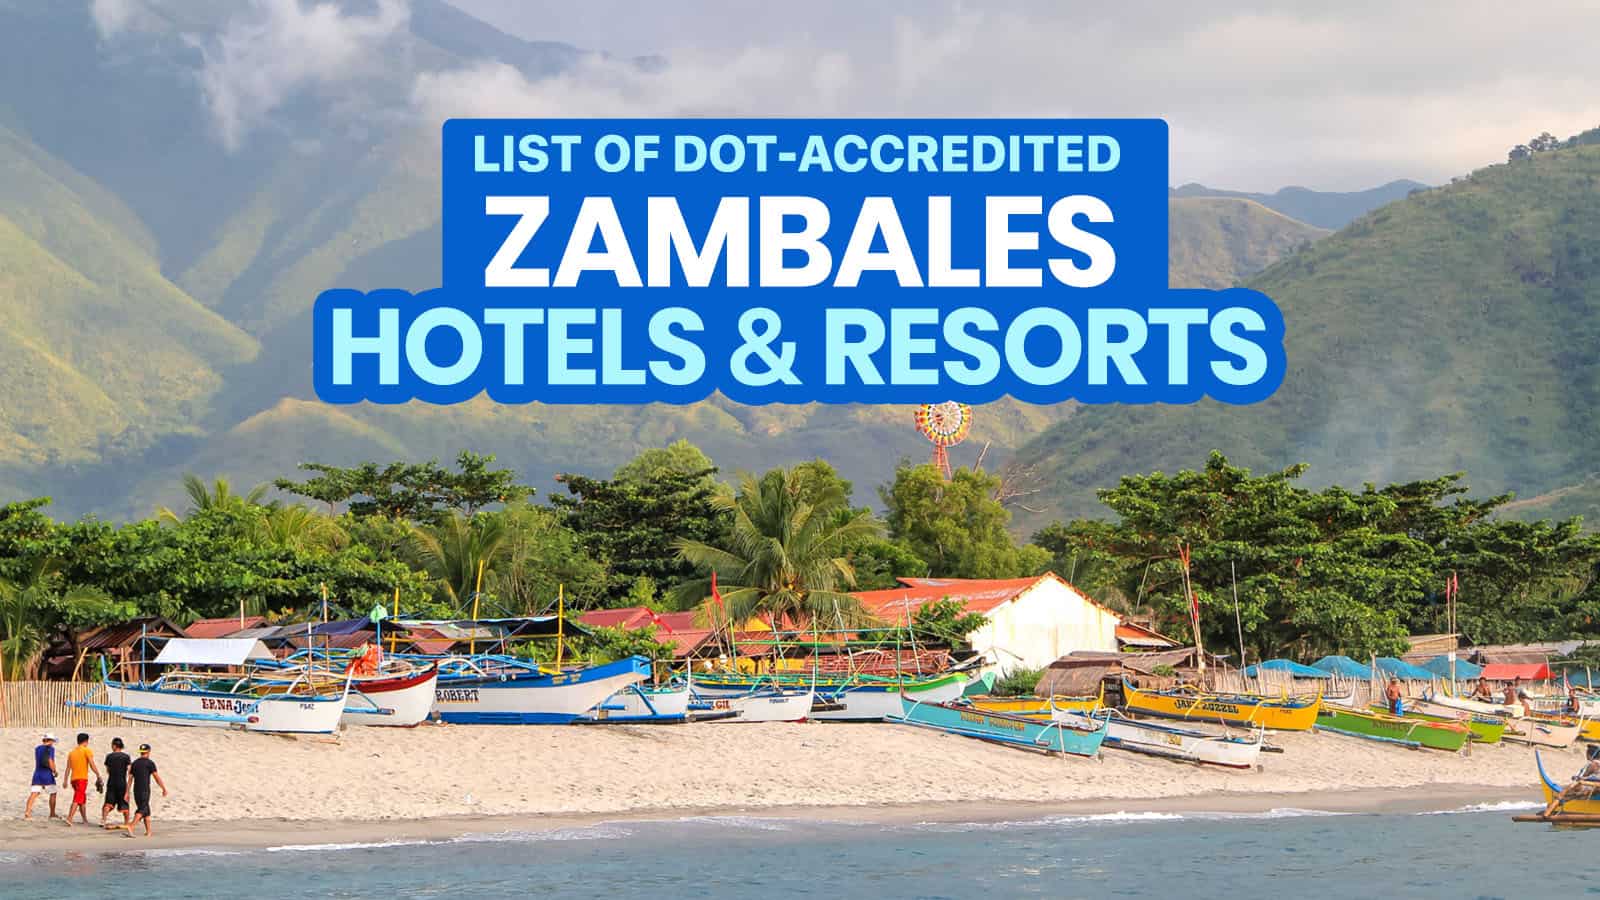 2022 List of DOT-Accredited Hotels & Resorts in ZAMBALES & SUBIC